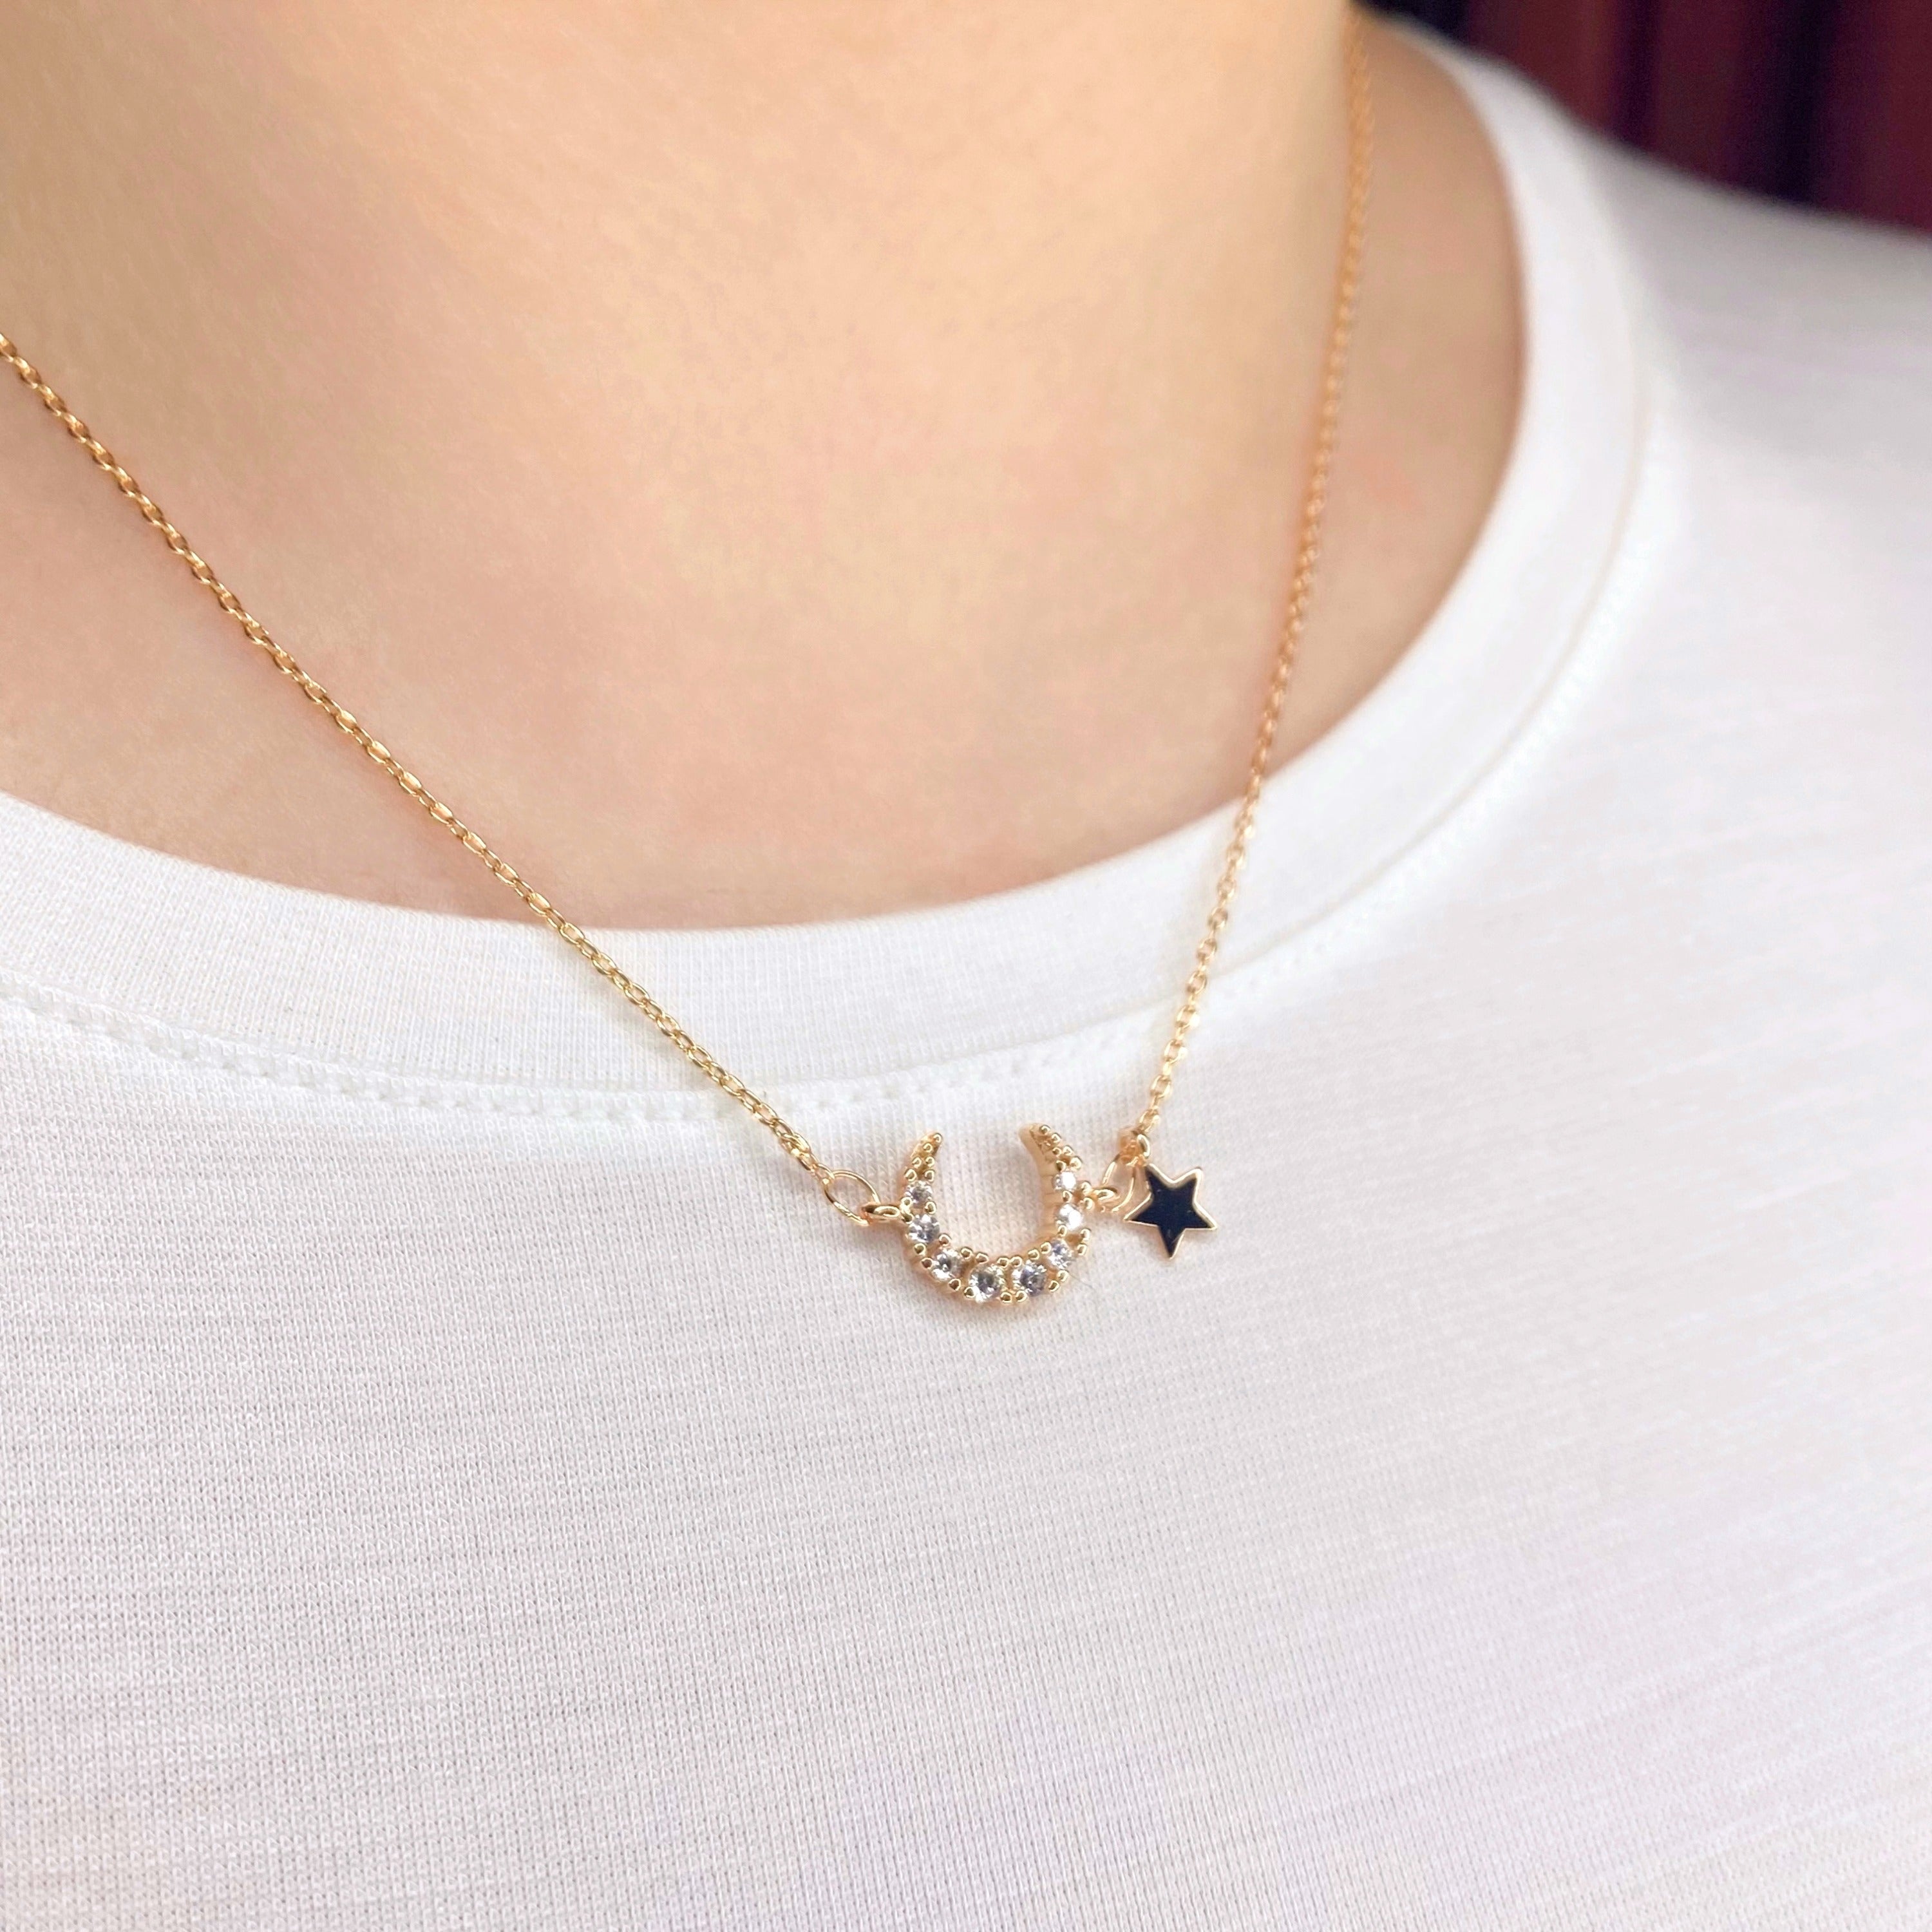 Adjustable Moon and Star Necklace